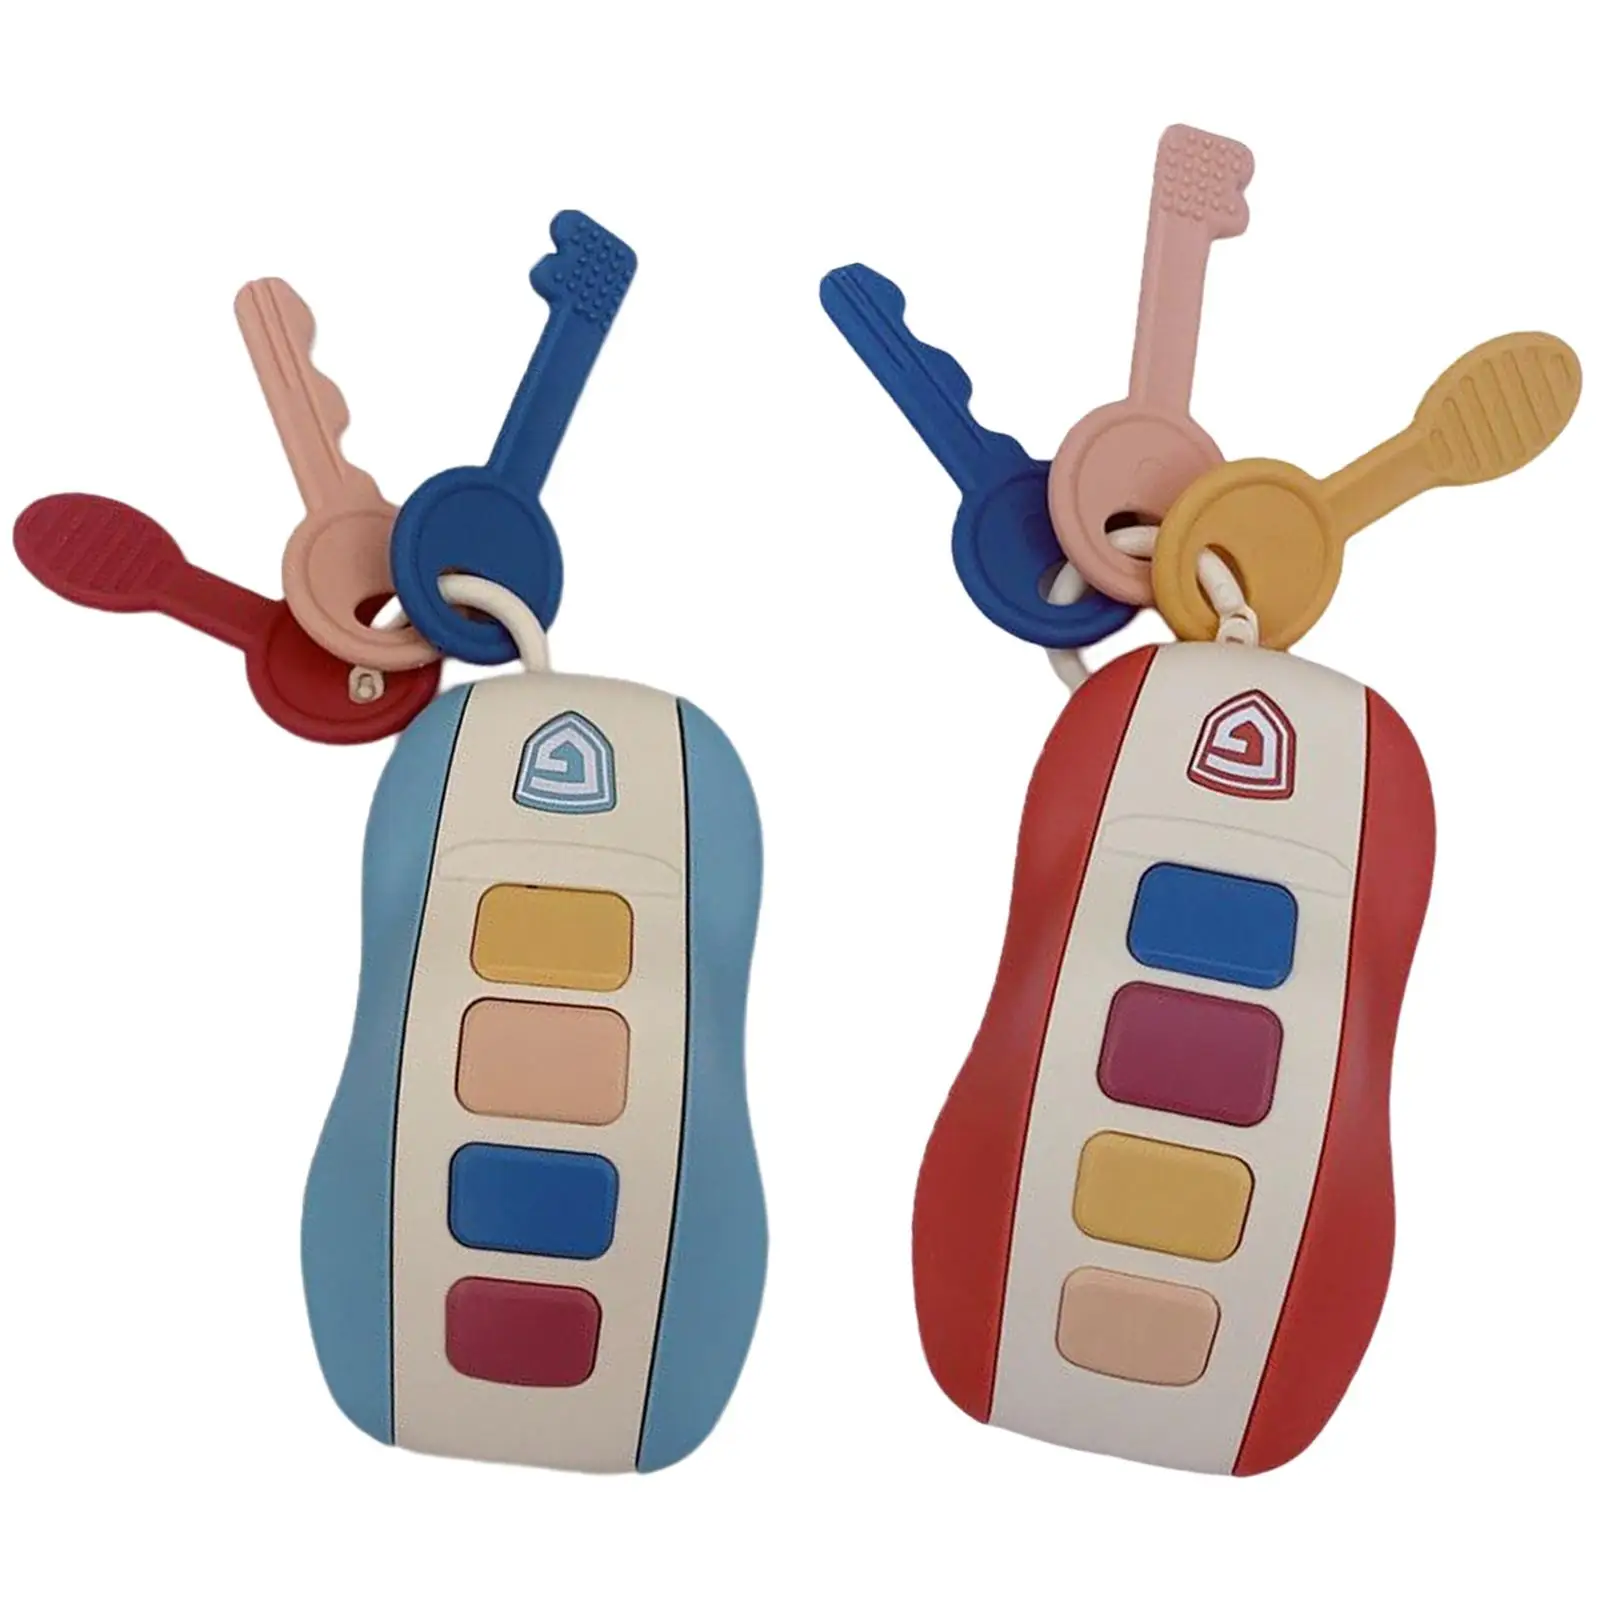 2x Musical Smart Remote Key Toy Electronic Pets for Toddler Birthday